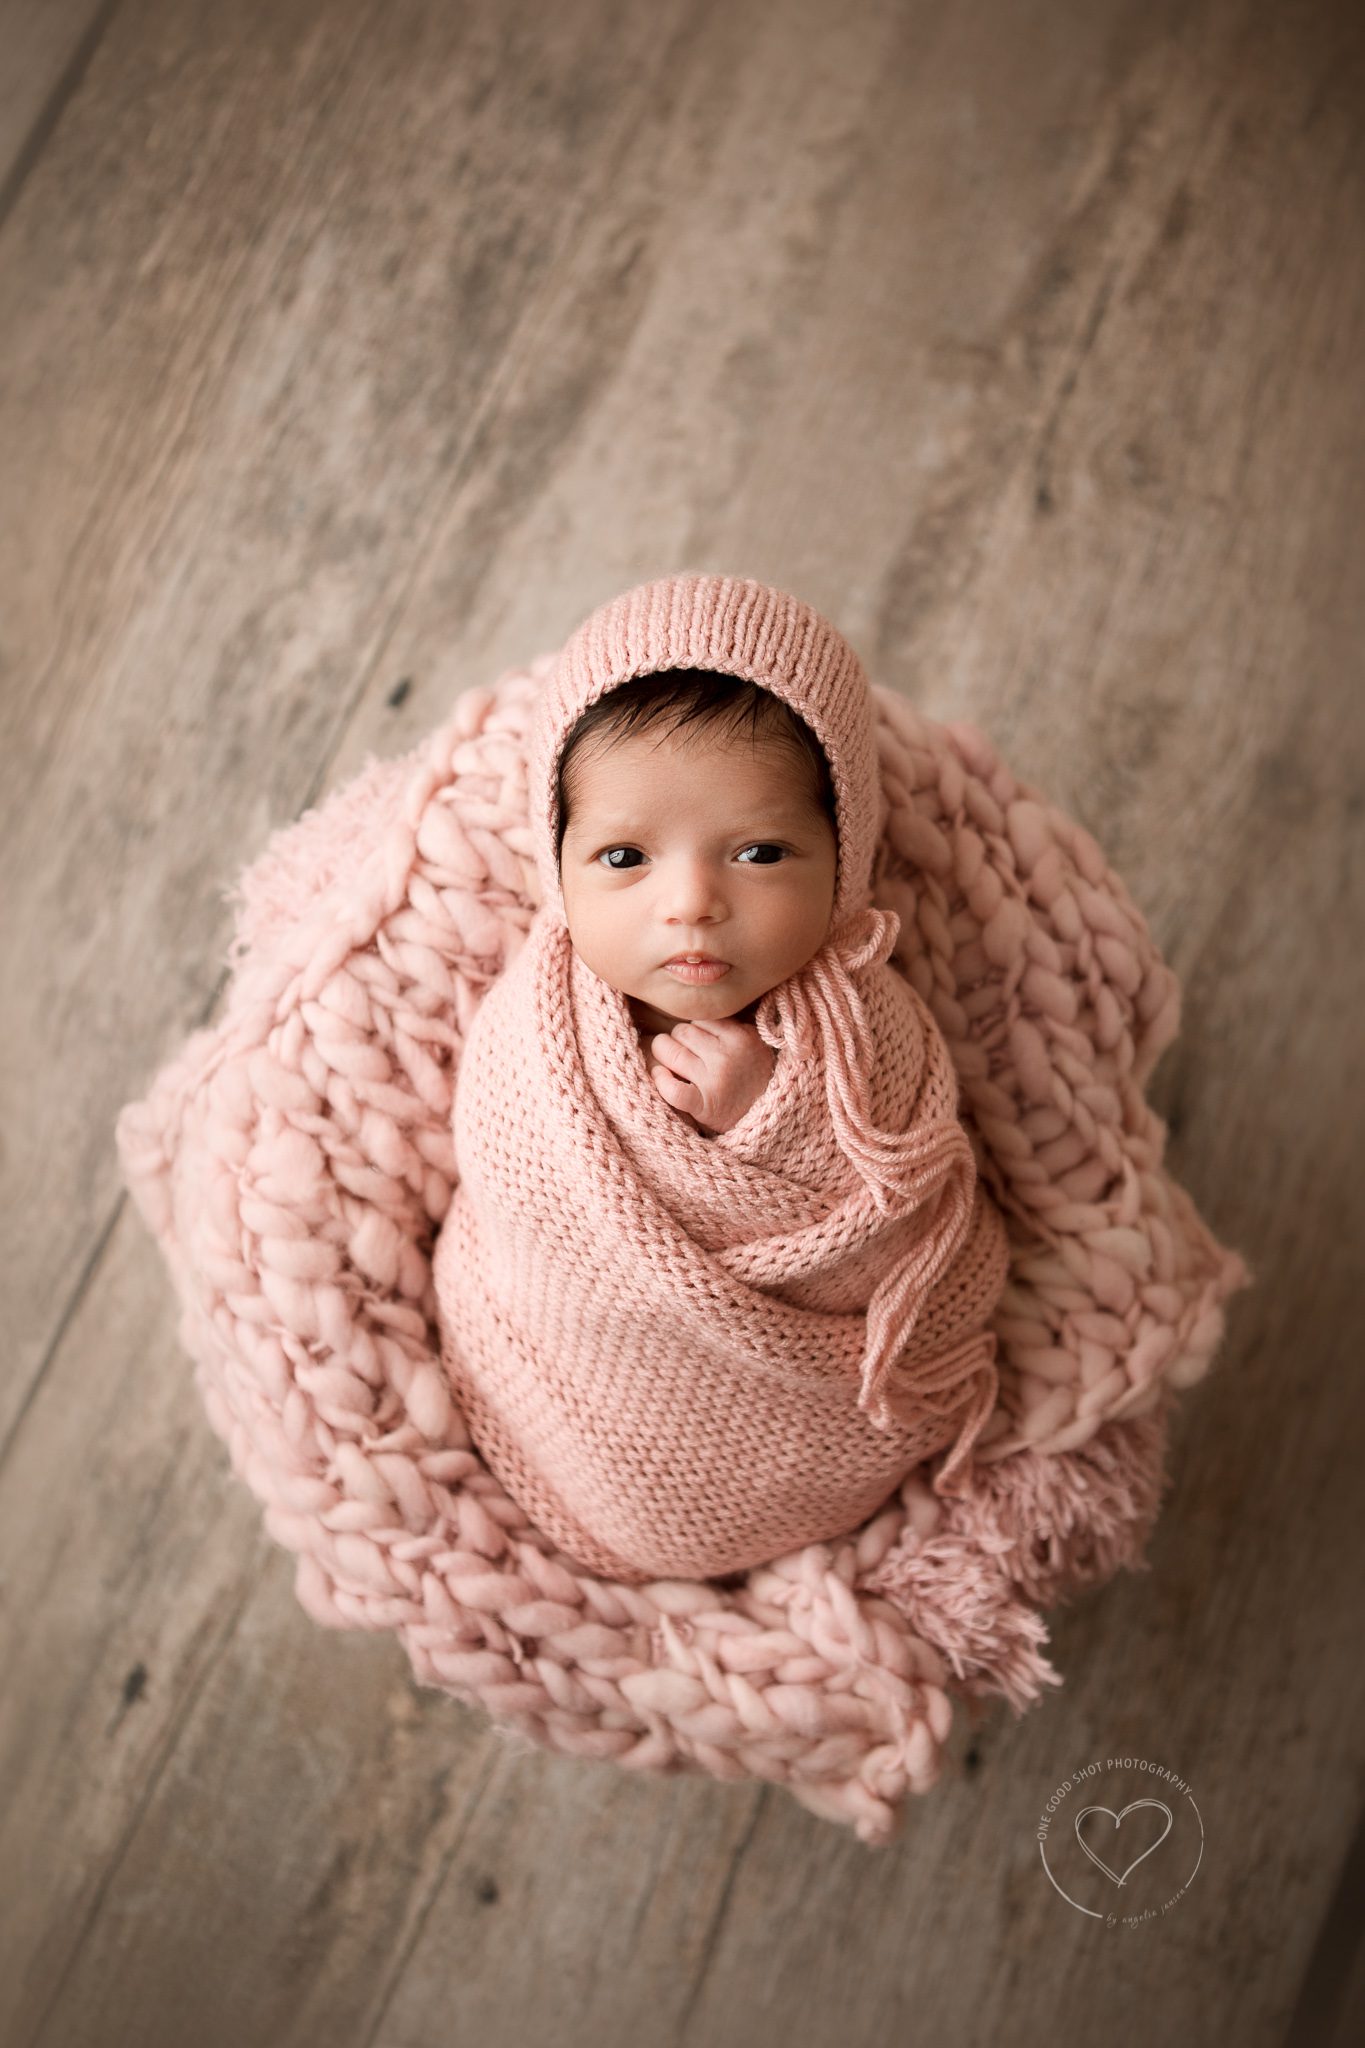 Newborn Photography, Baby awake, wrapped in pink, lying in bucket, bonnet